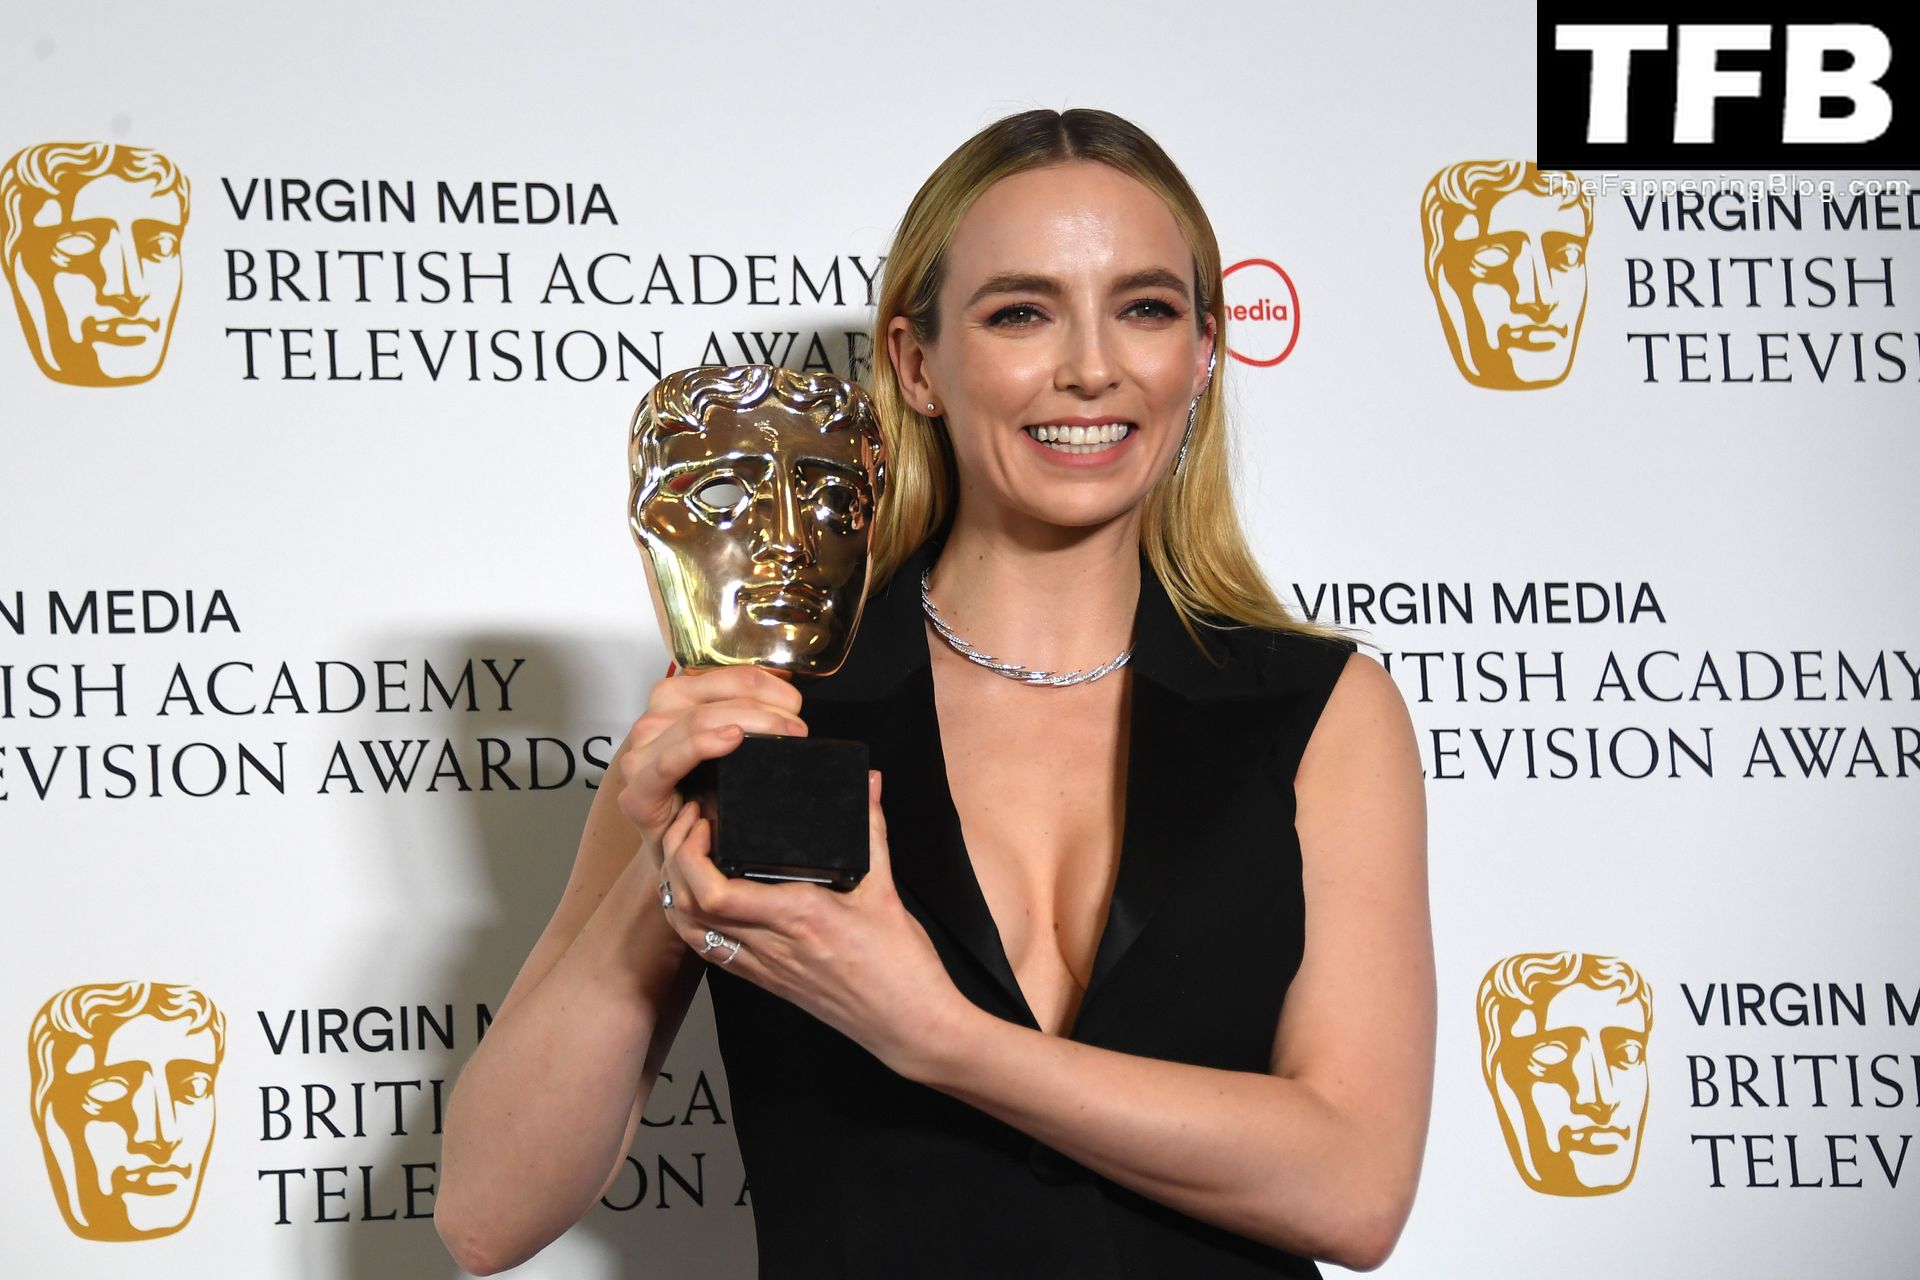 Jodie-Comer-Sexy-The-Fappening-Blog-87.jpg